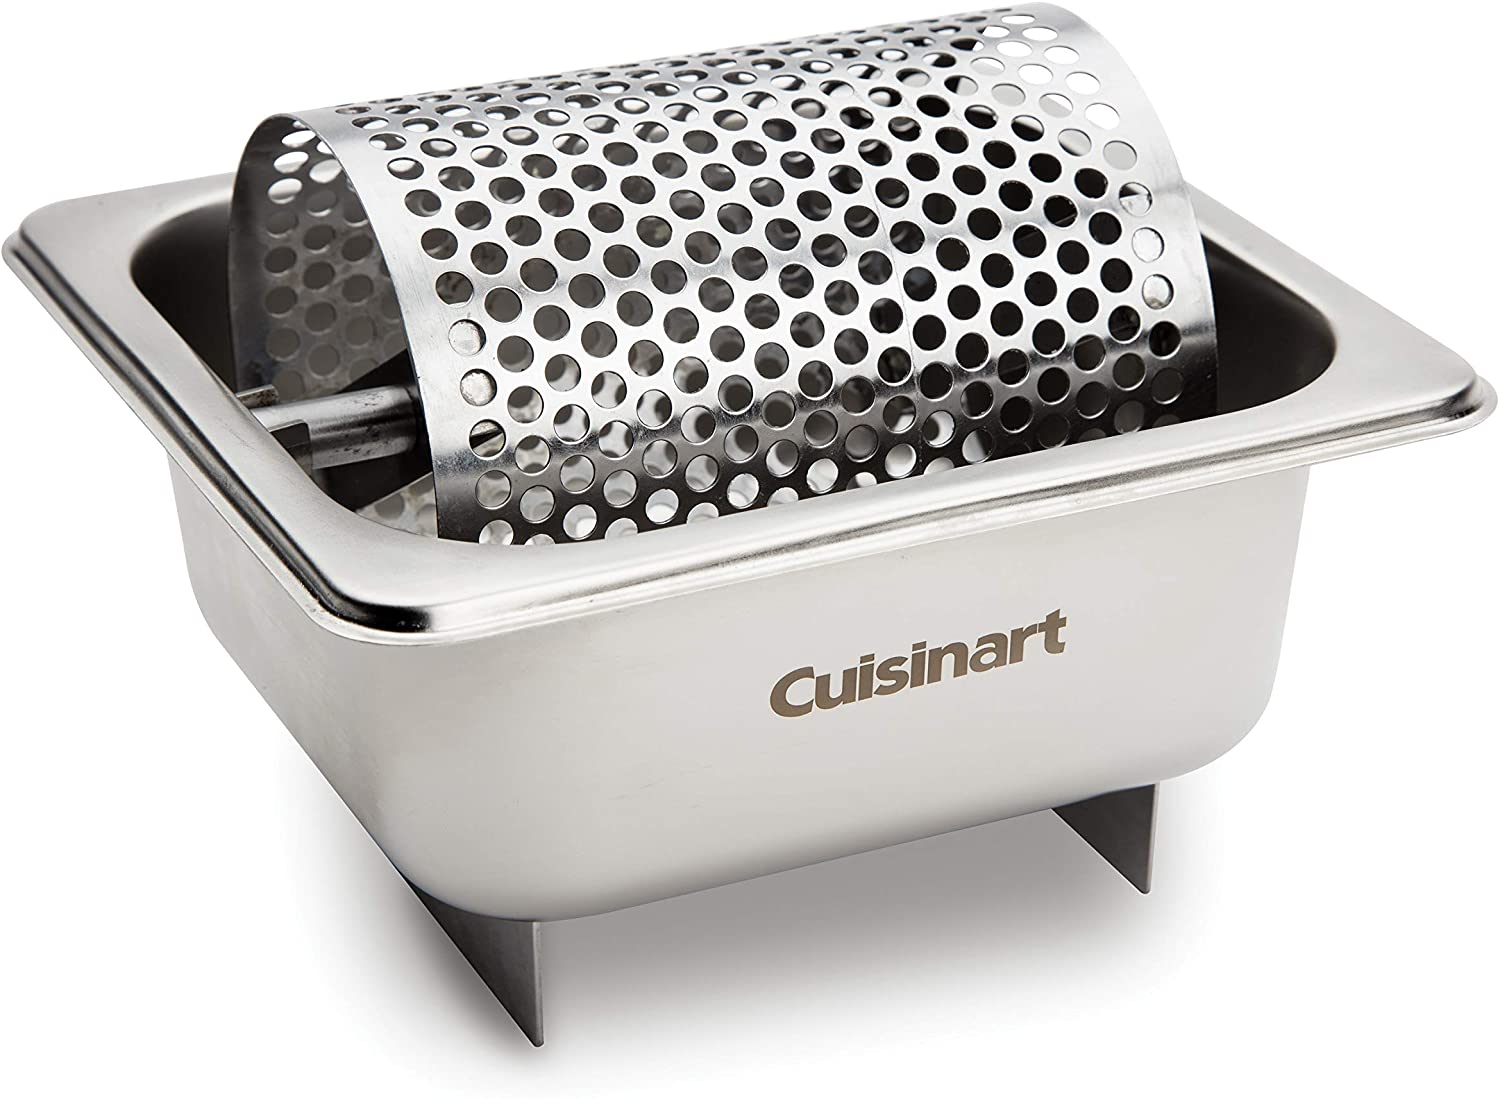 Review of Cuisinart CBW-201 Butter Wheel Stainless Steel